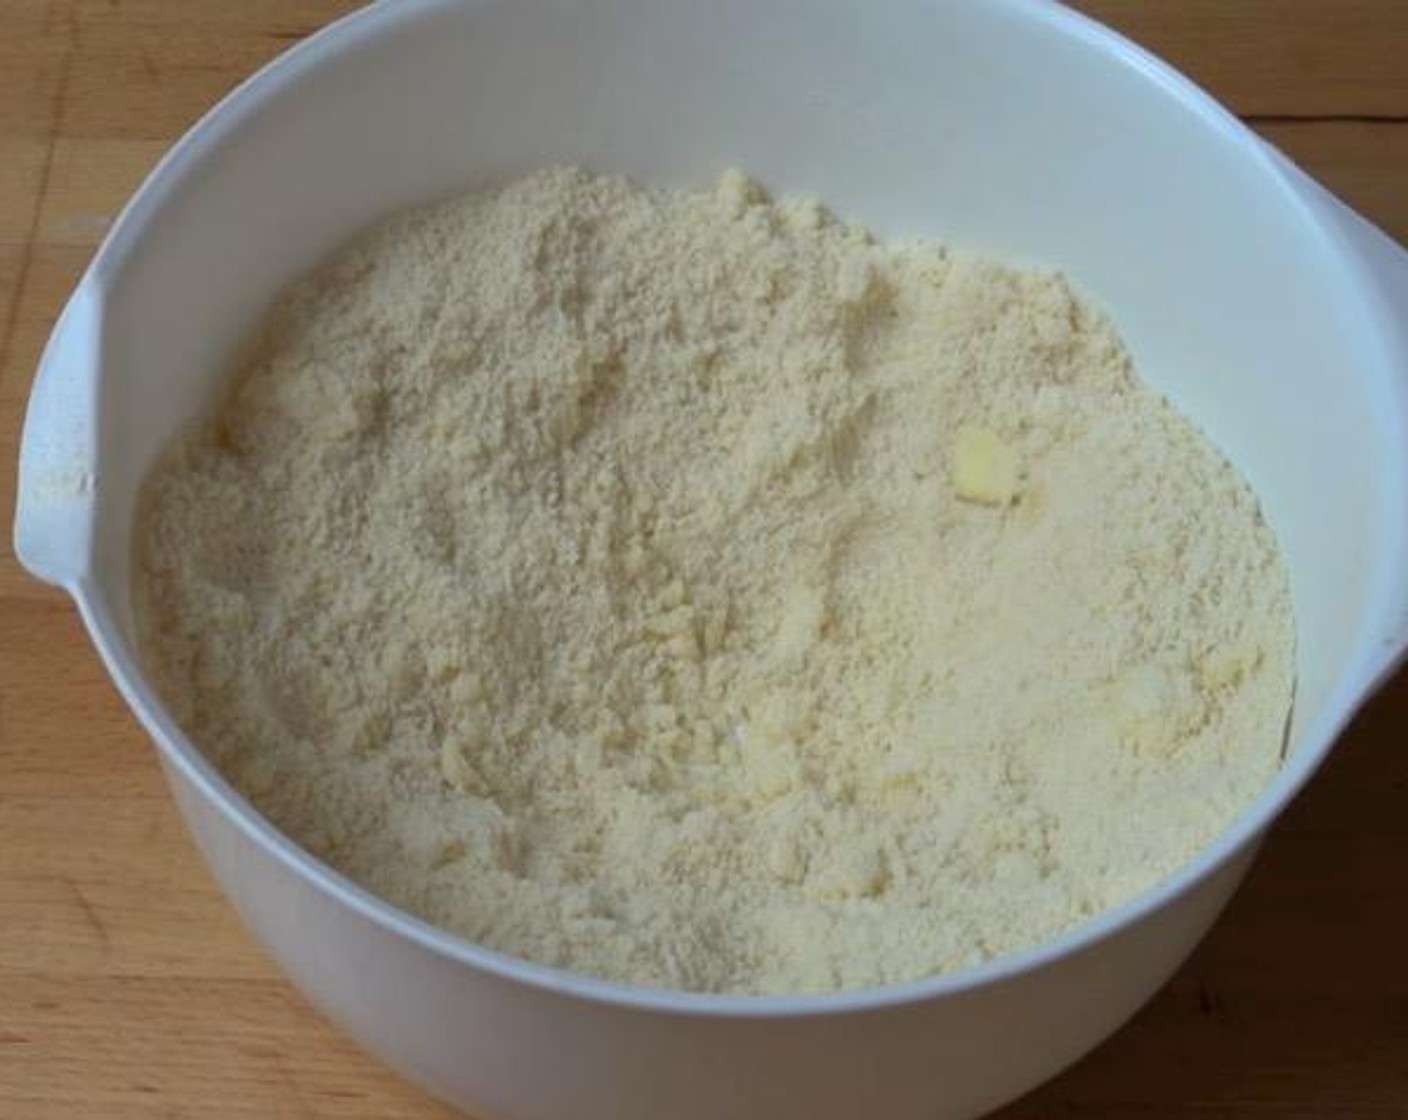 step 2 Add Butter (1/3 cup). Using your fingers, rub the butter and flour mixture together until it has the texture of breadcrumbs.